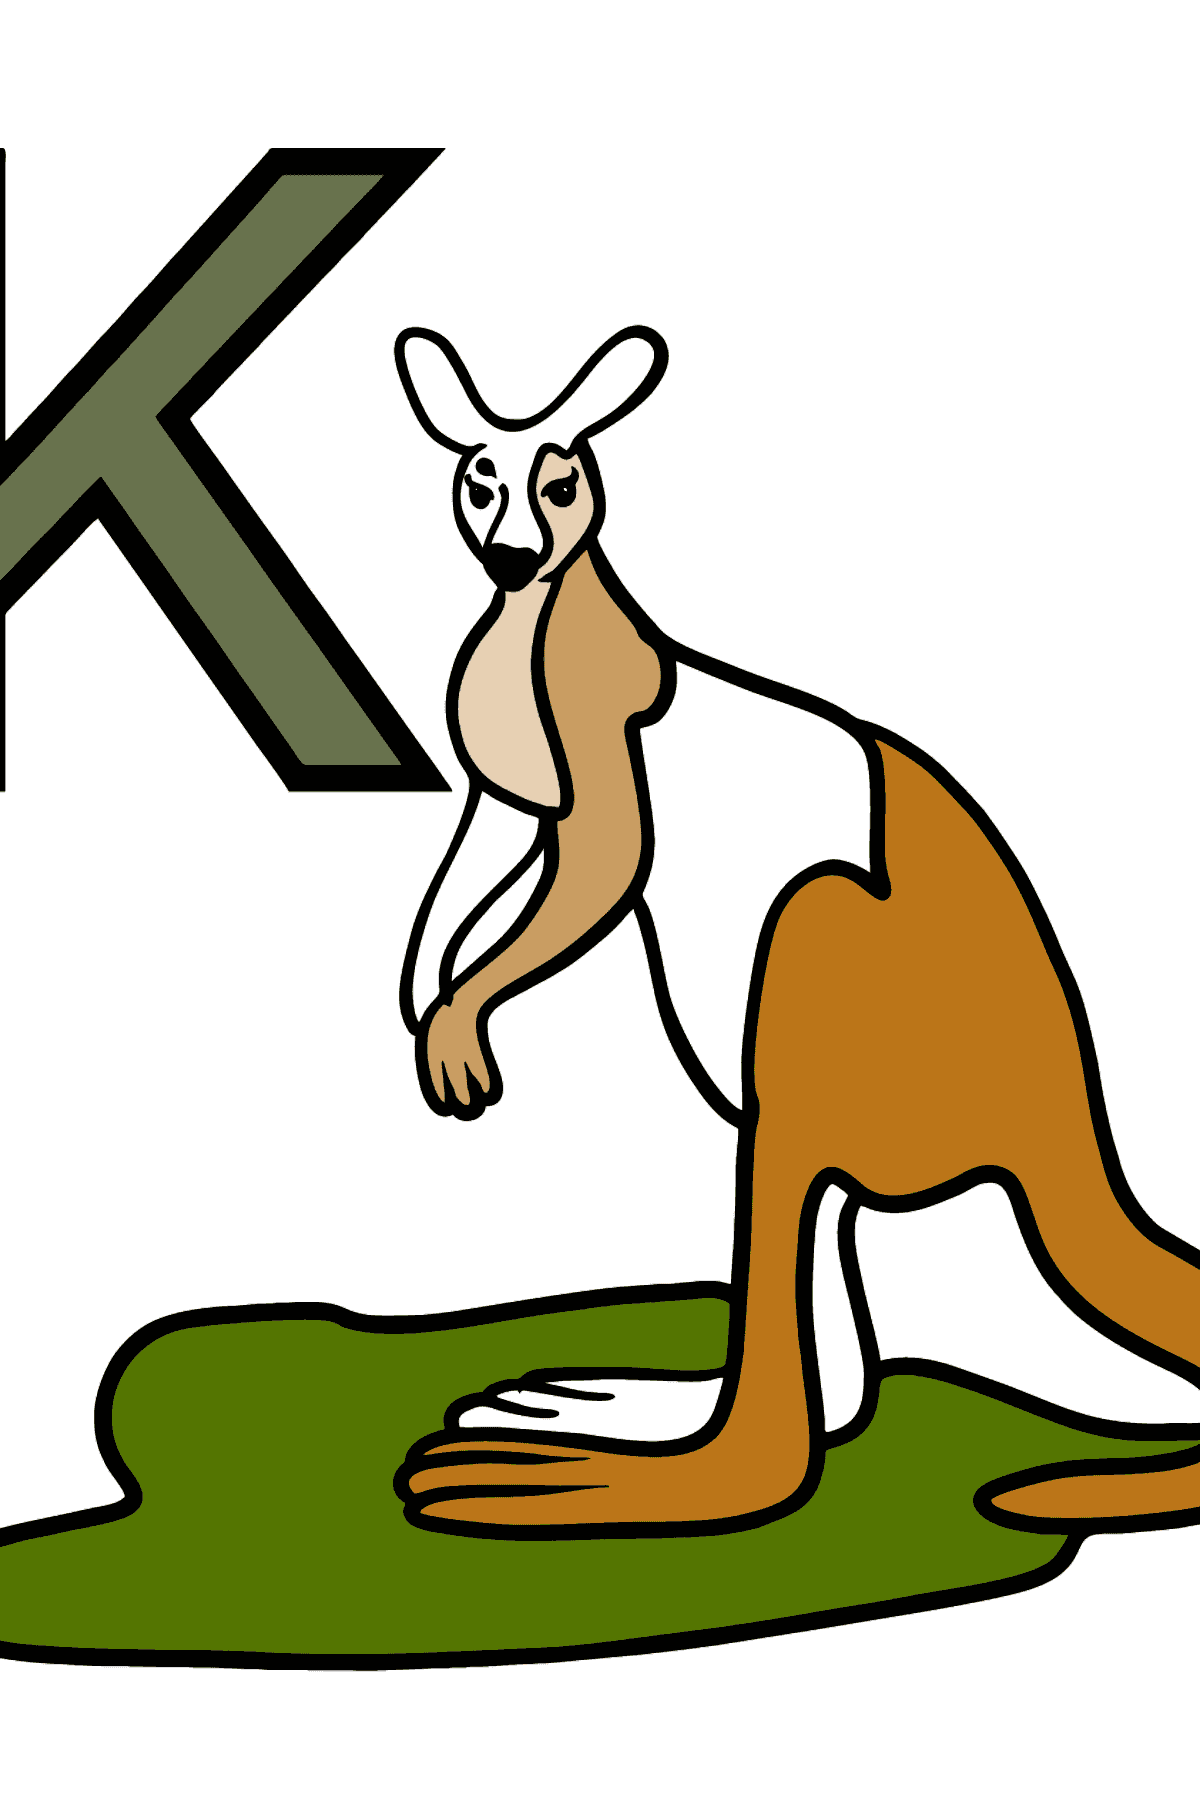 English Letter K coloring pages - KANGAROO - Coloring Pages for Kids